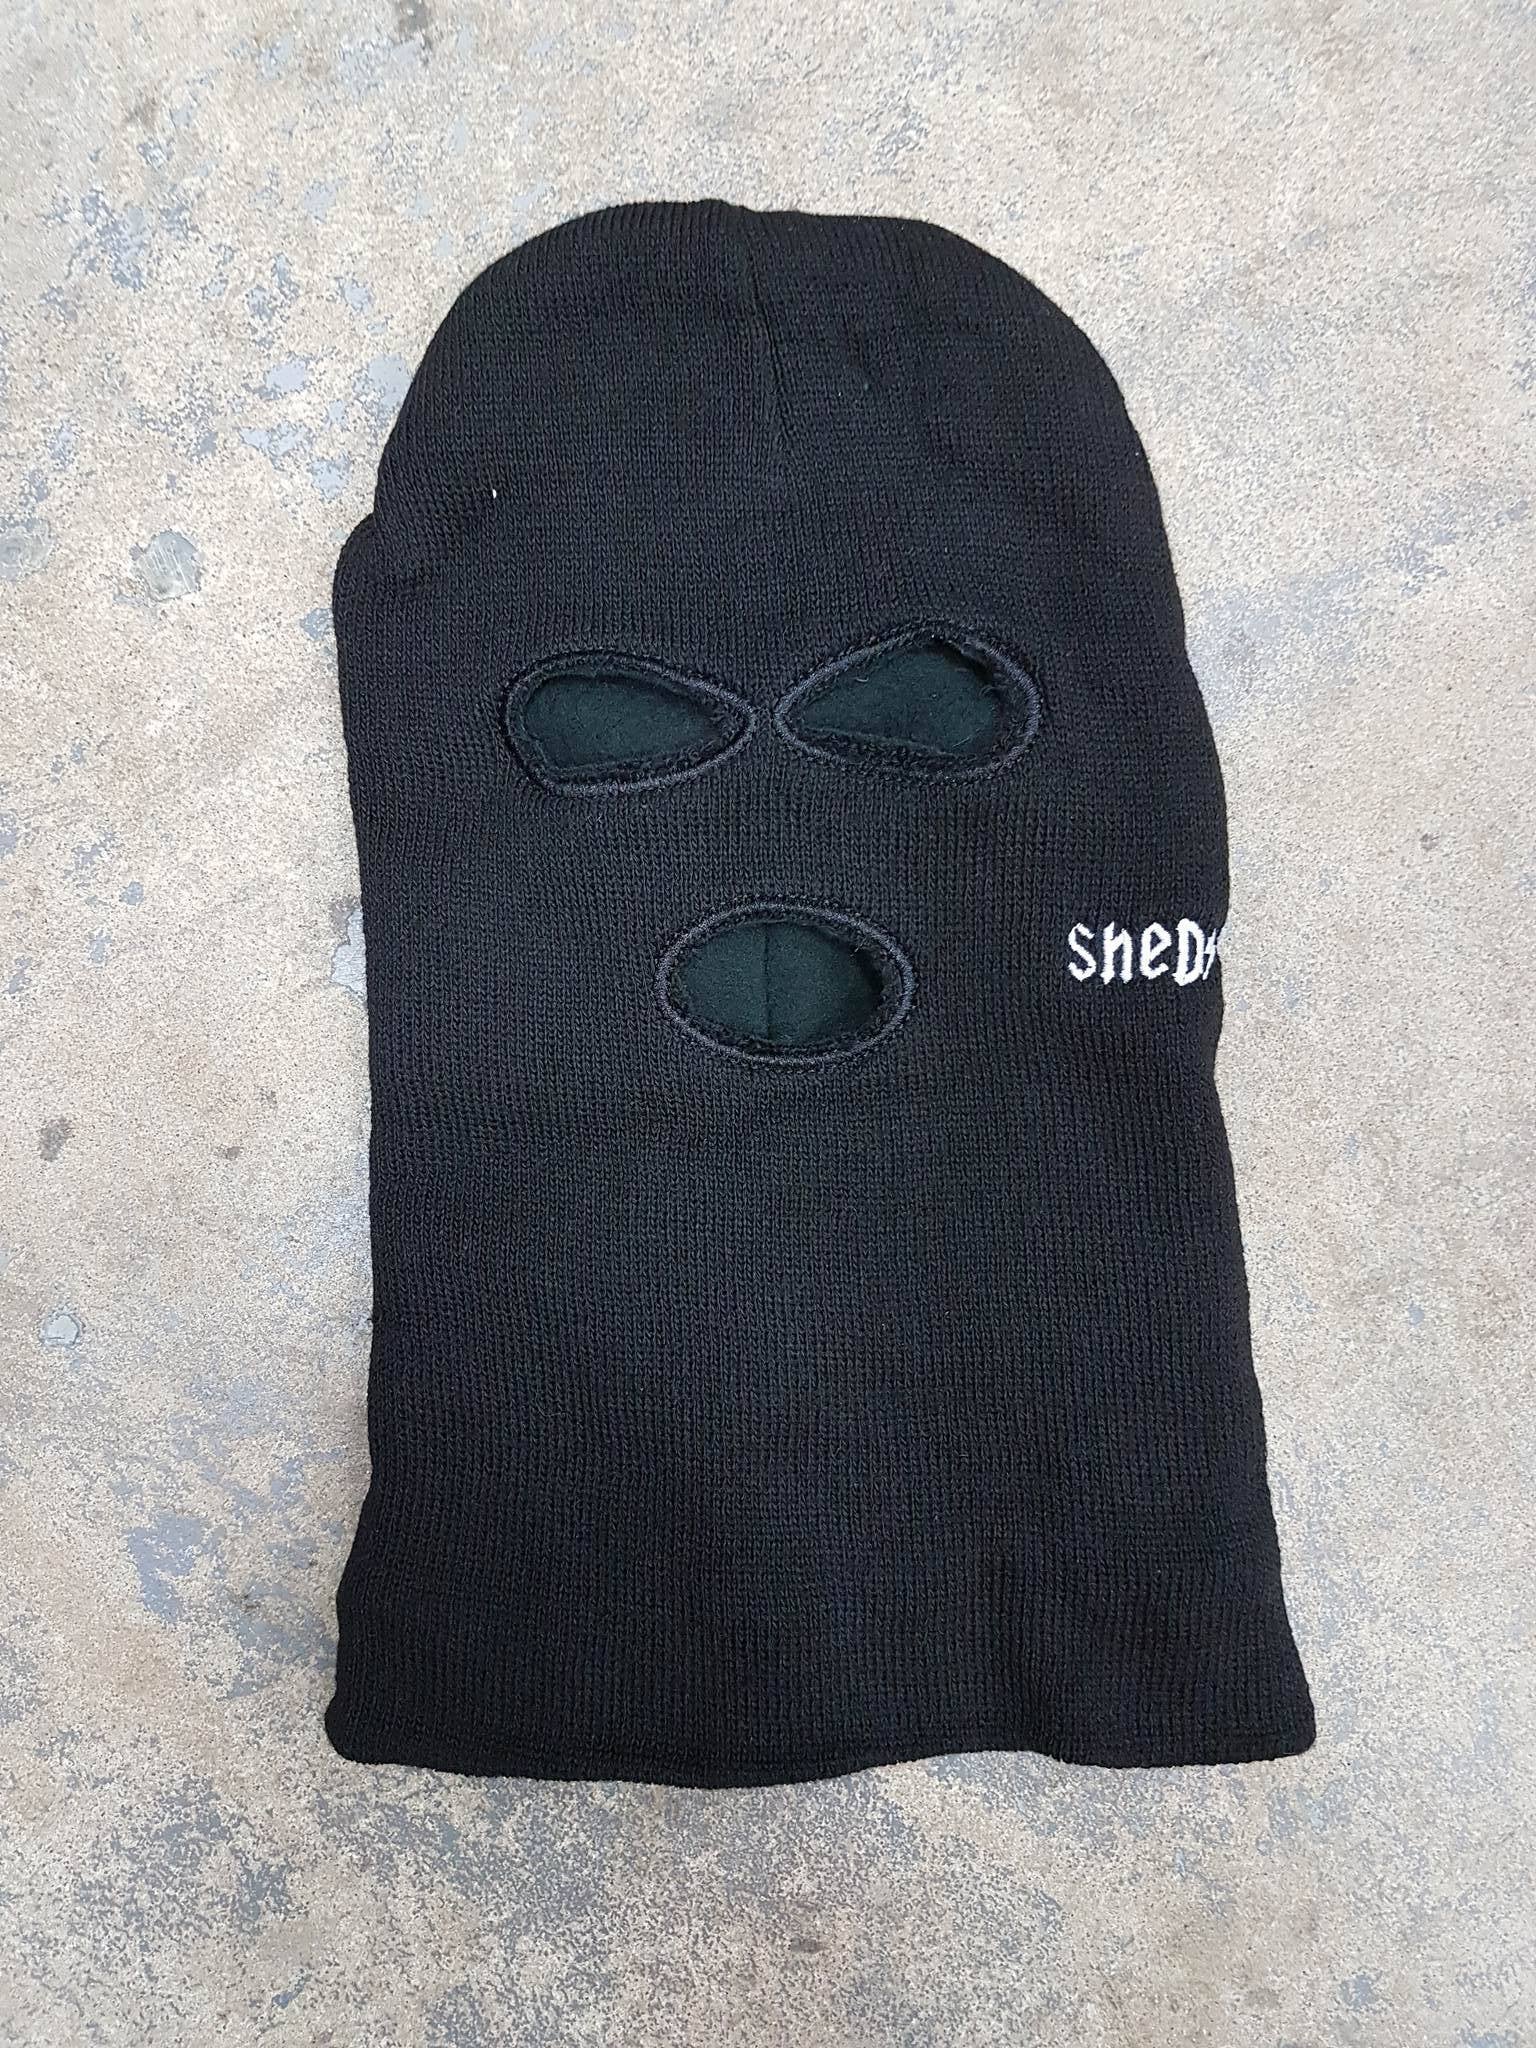 The Fully Lined Funkytown Facemask -  Facemask, Shed Nine, Shed Nine